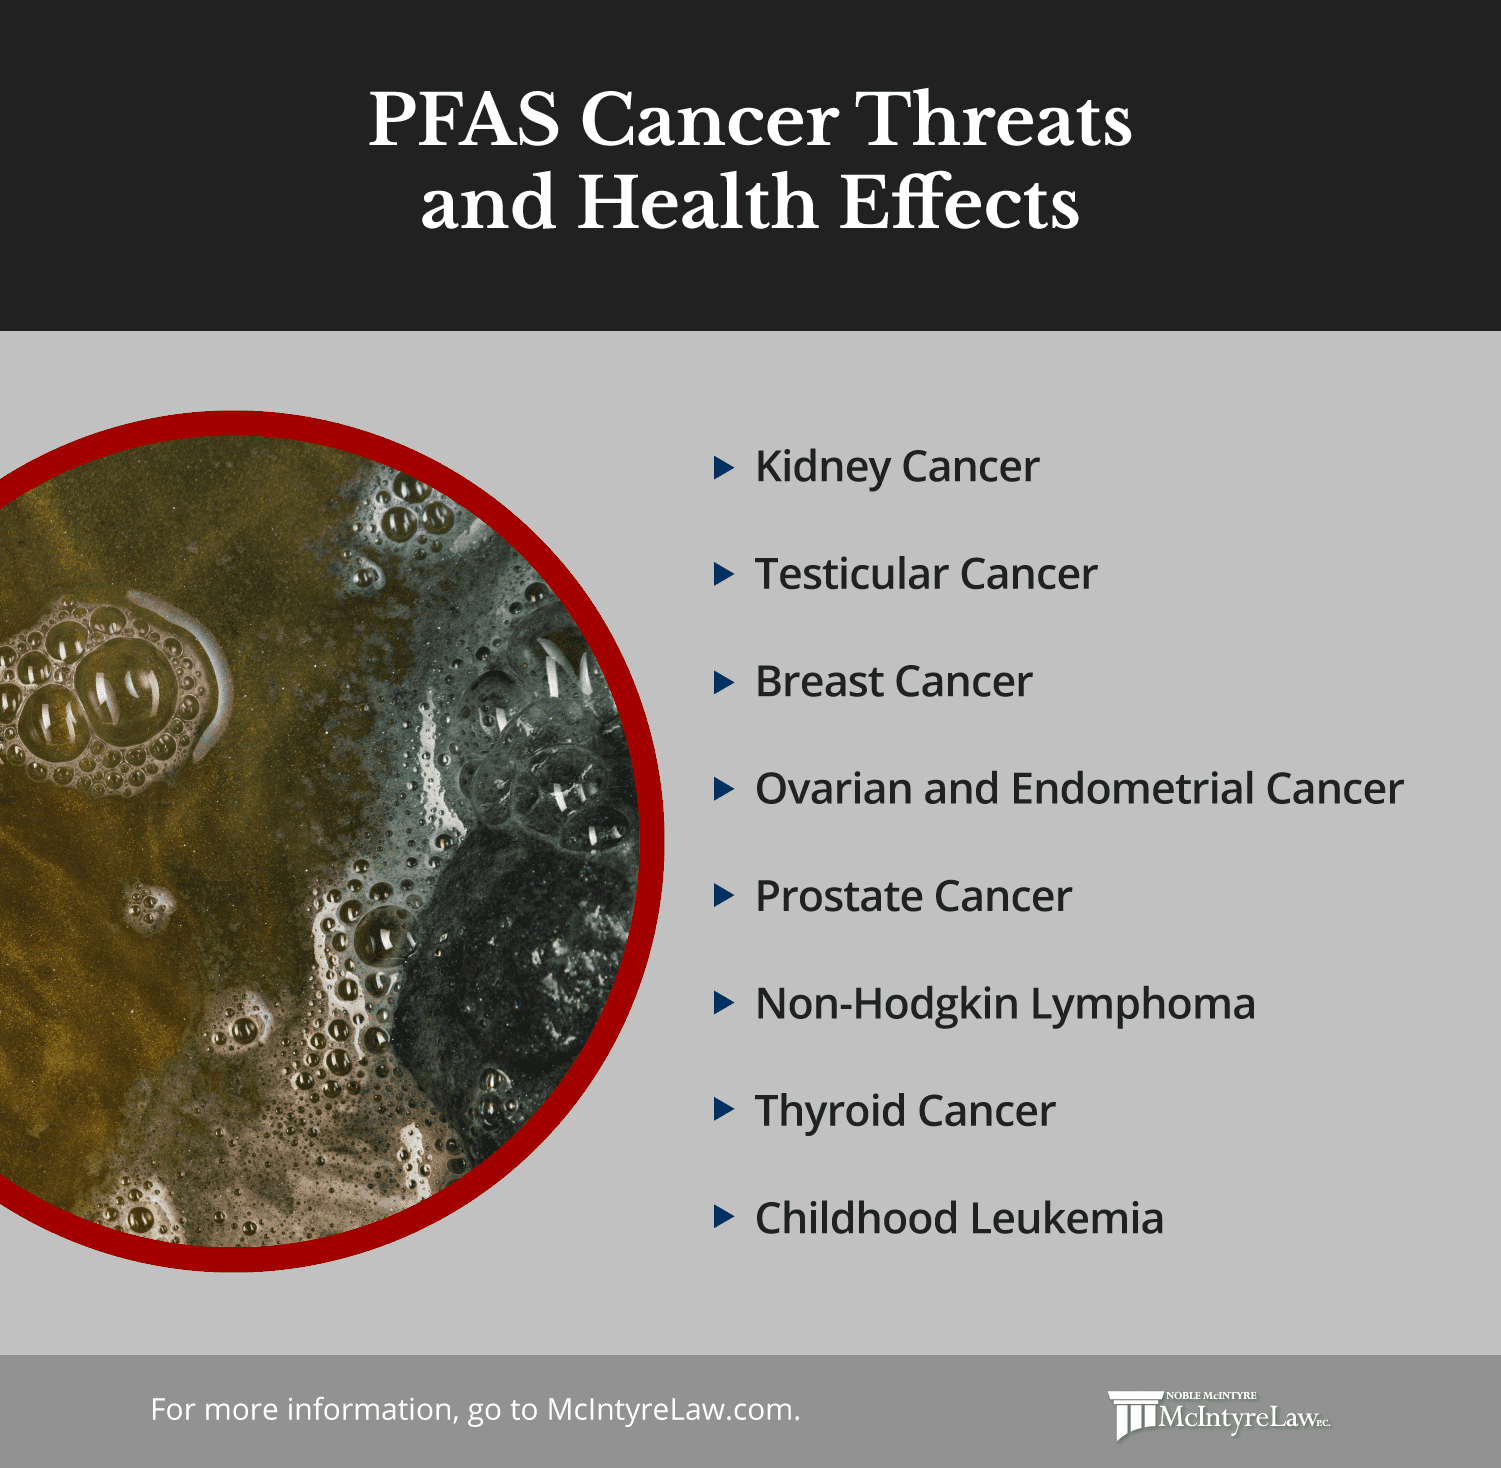 PFAS cancer threats and other health effects.